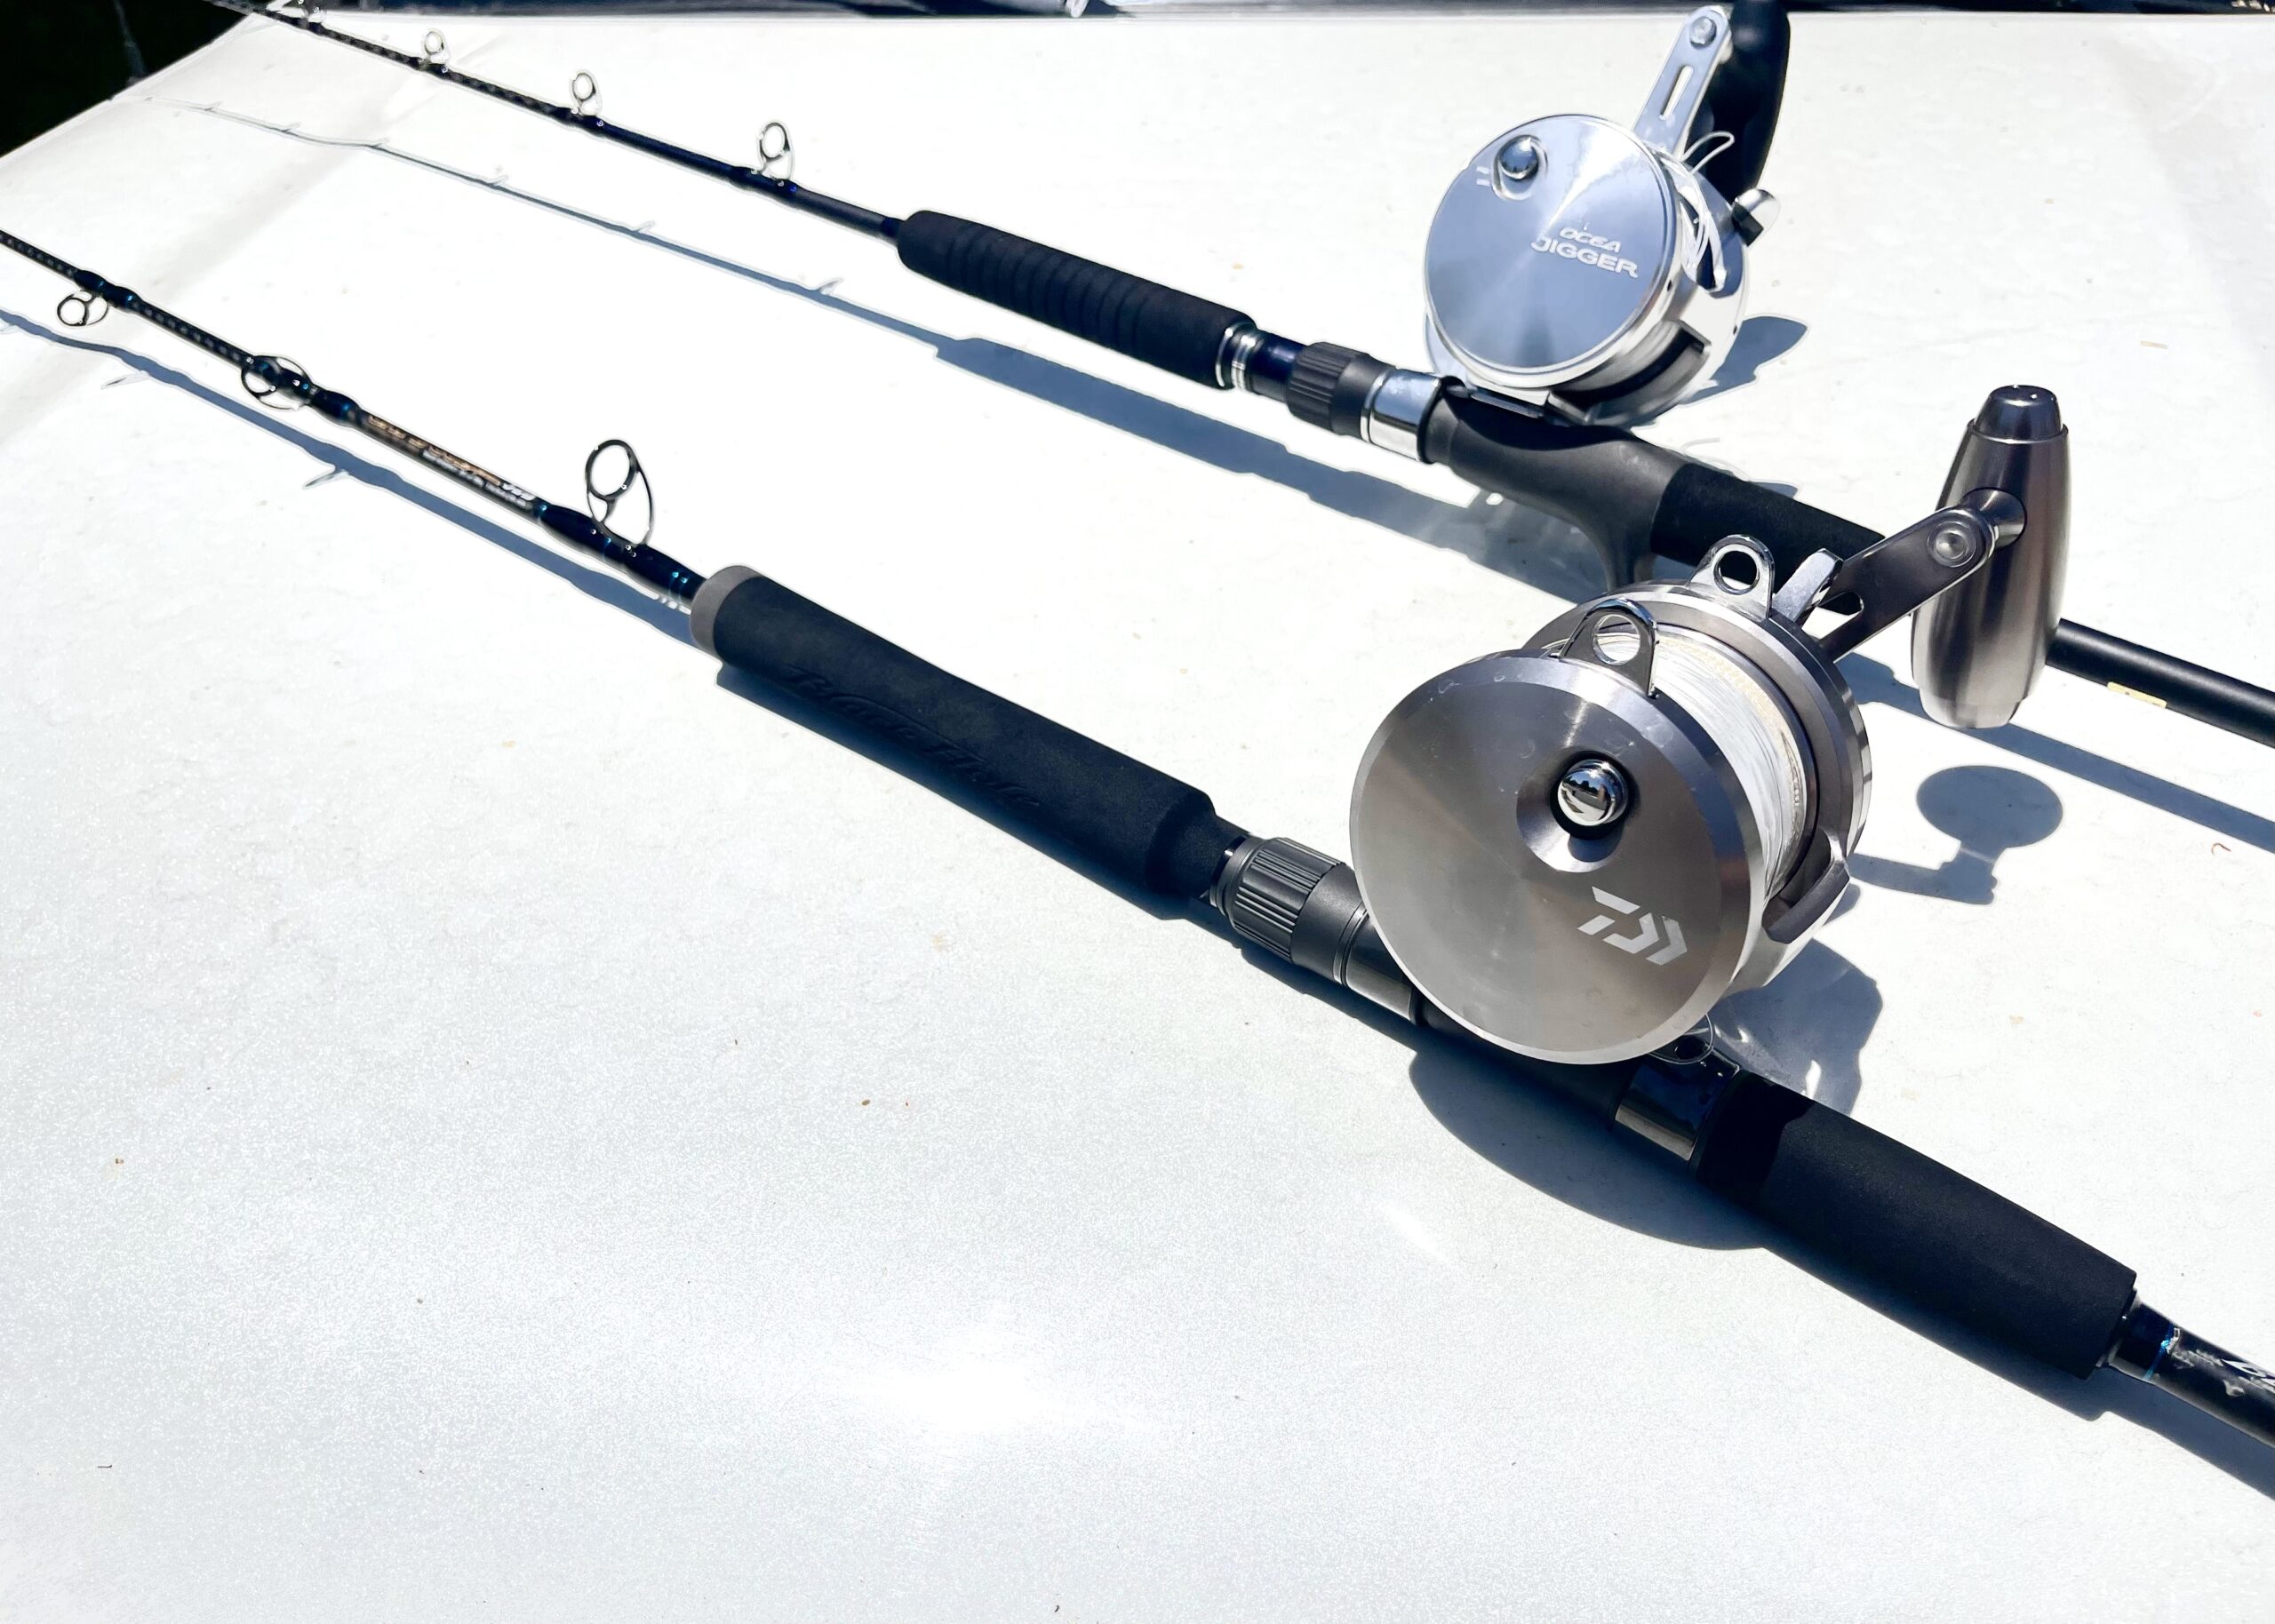 Saltwater jigging techniques - Correct rod and reel set up